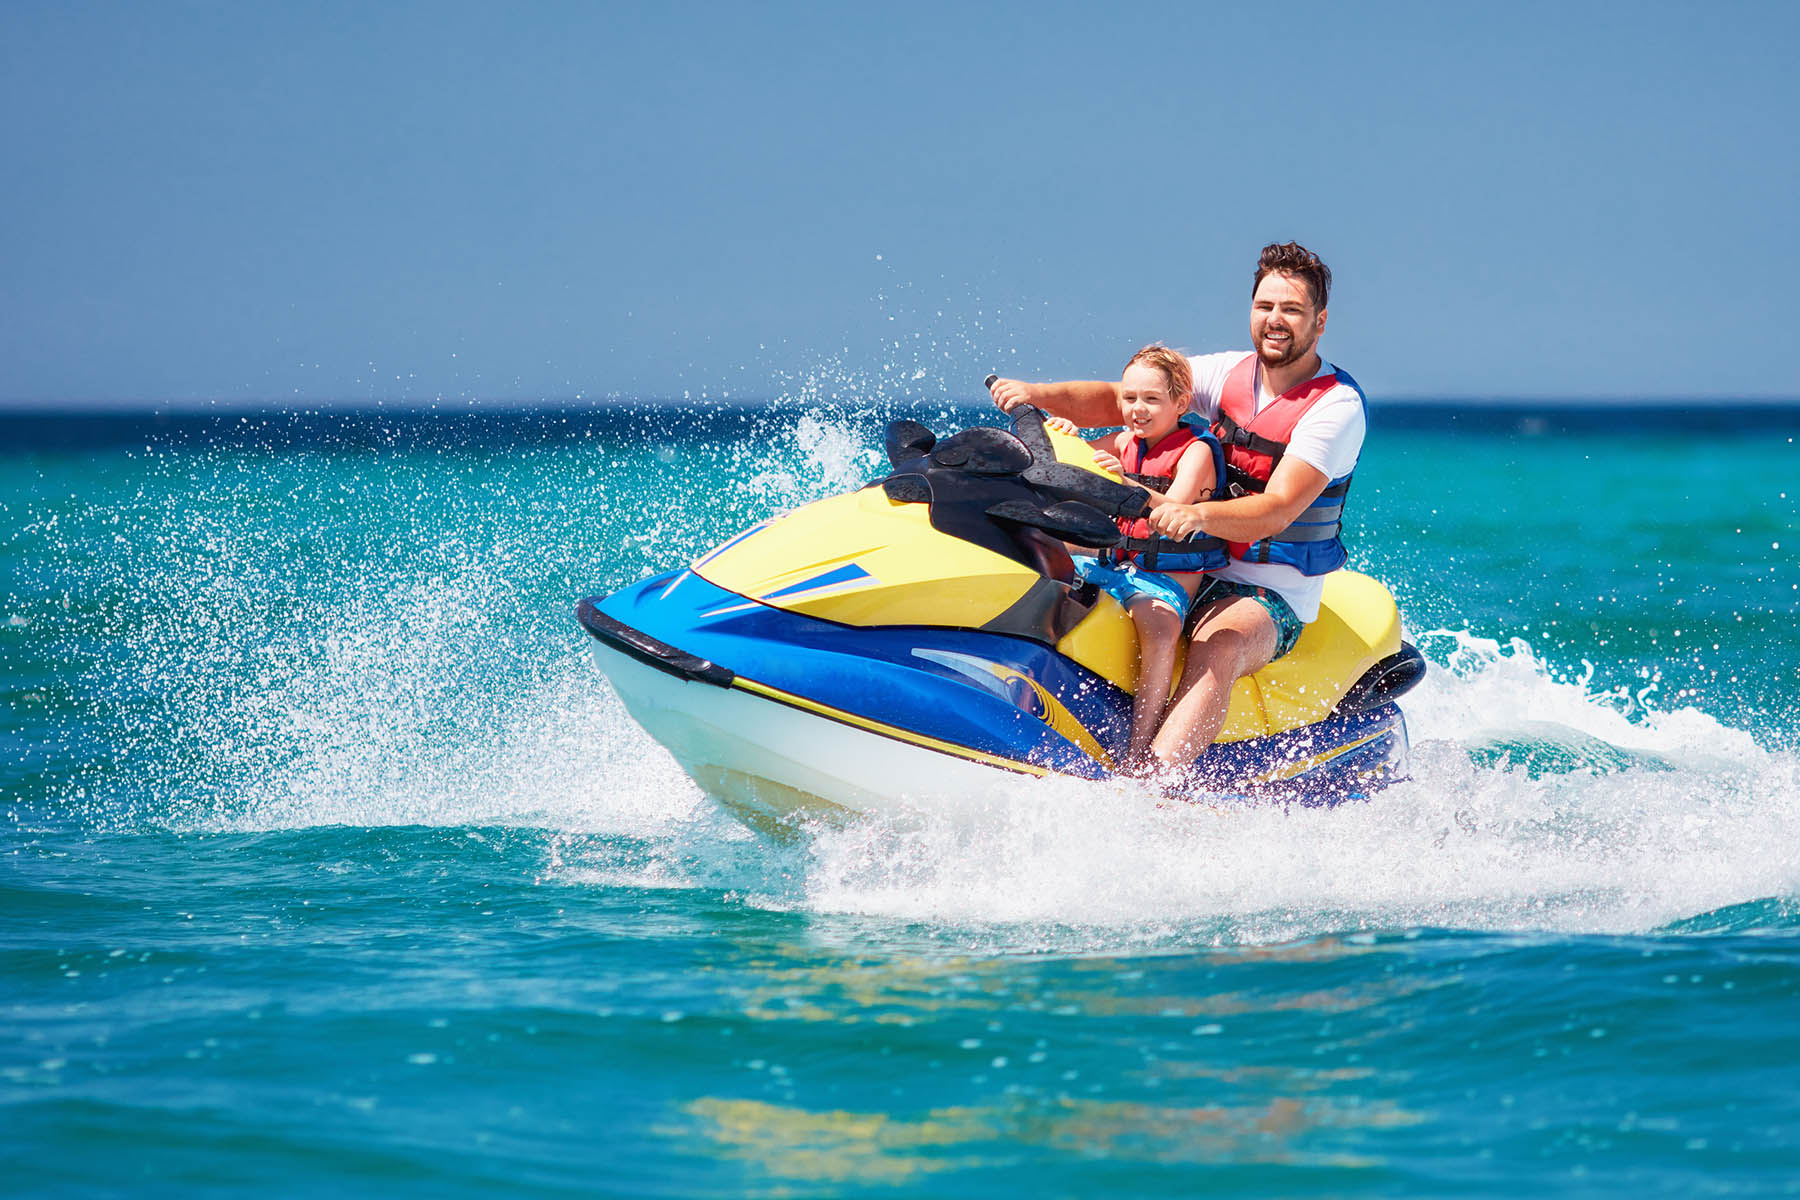 OBX Water Sports: Jet Skiing, Paddleboarding, and More